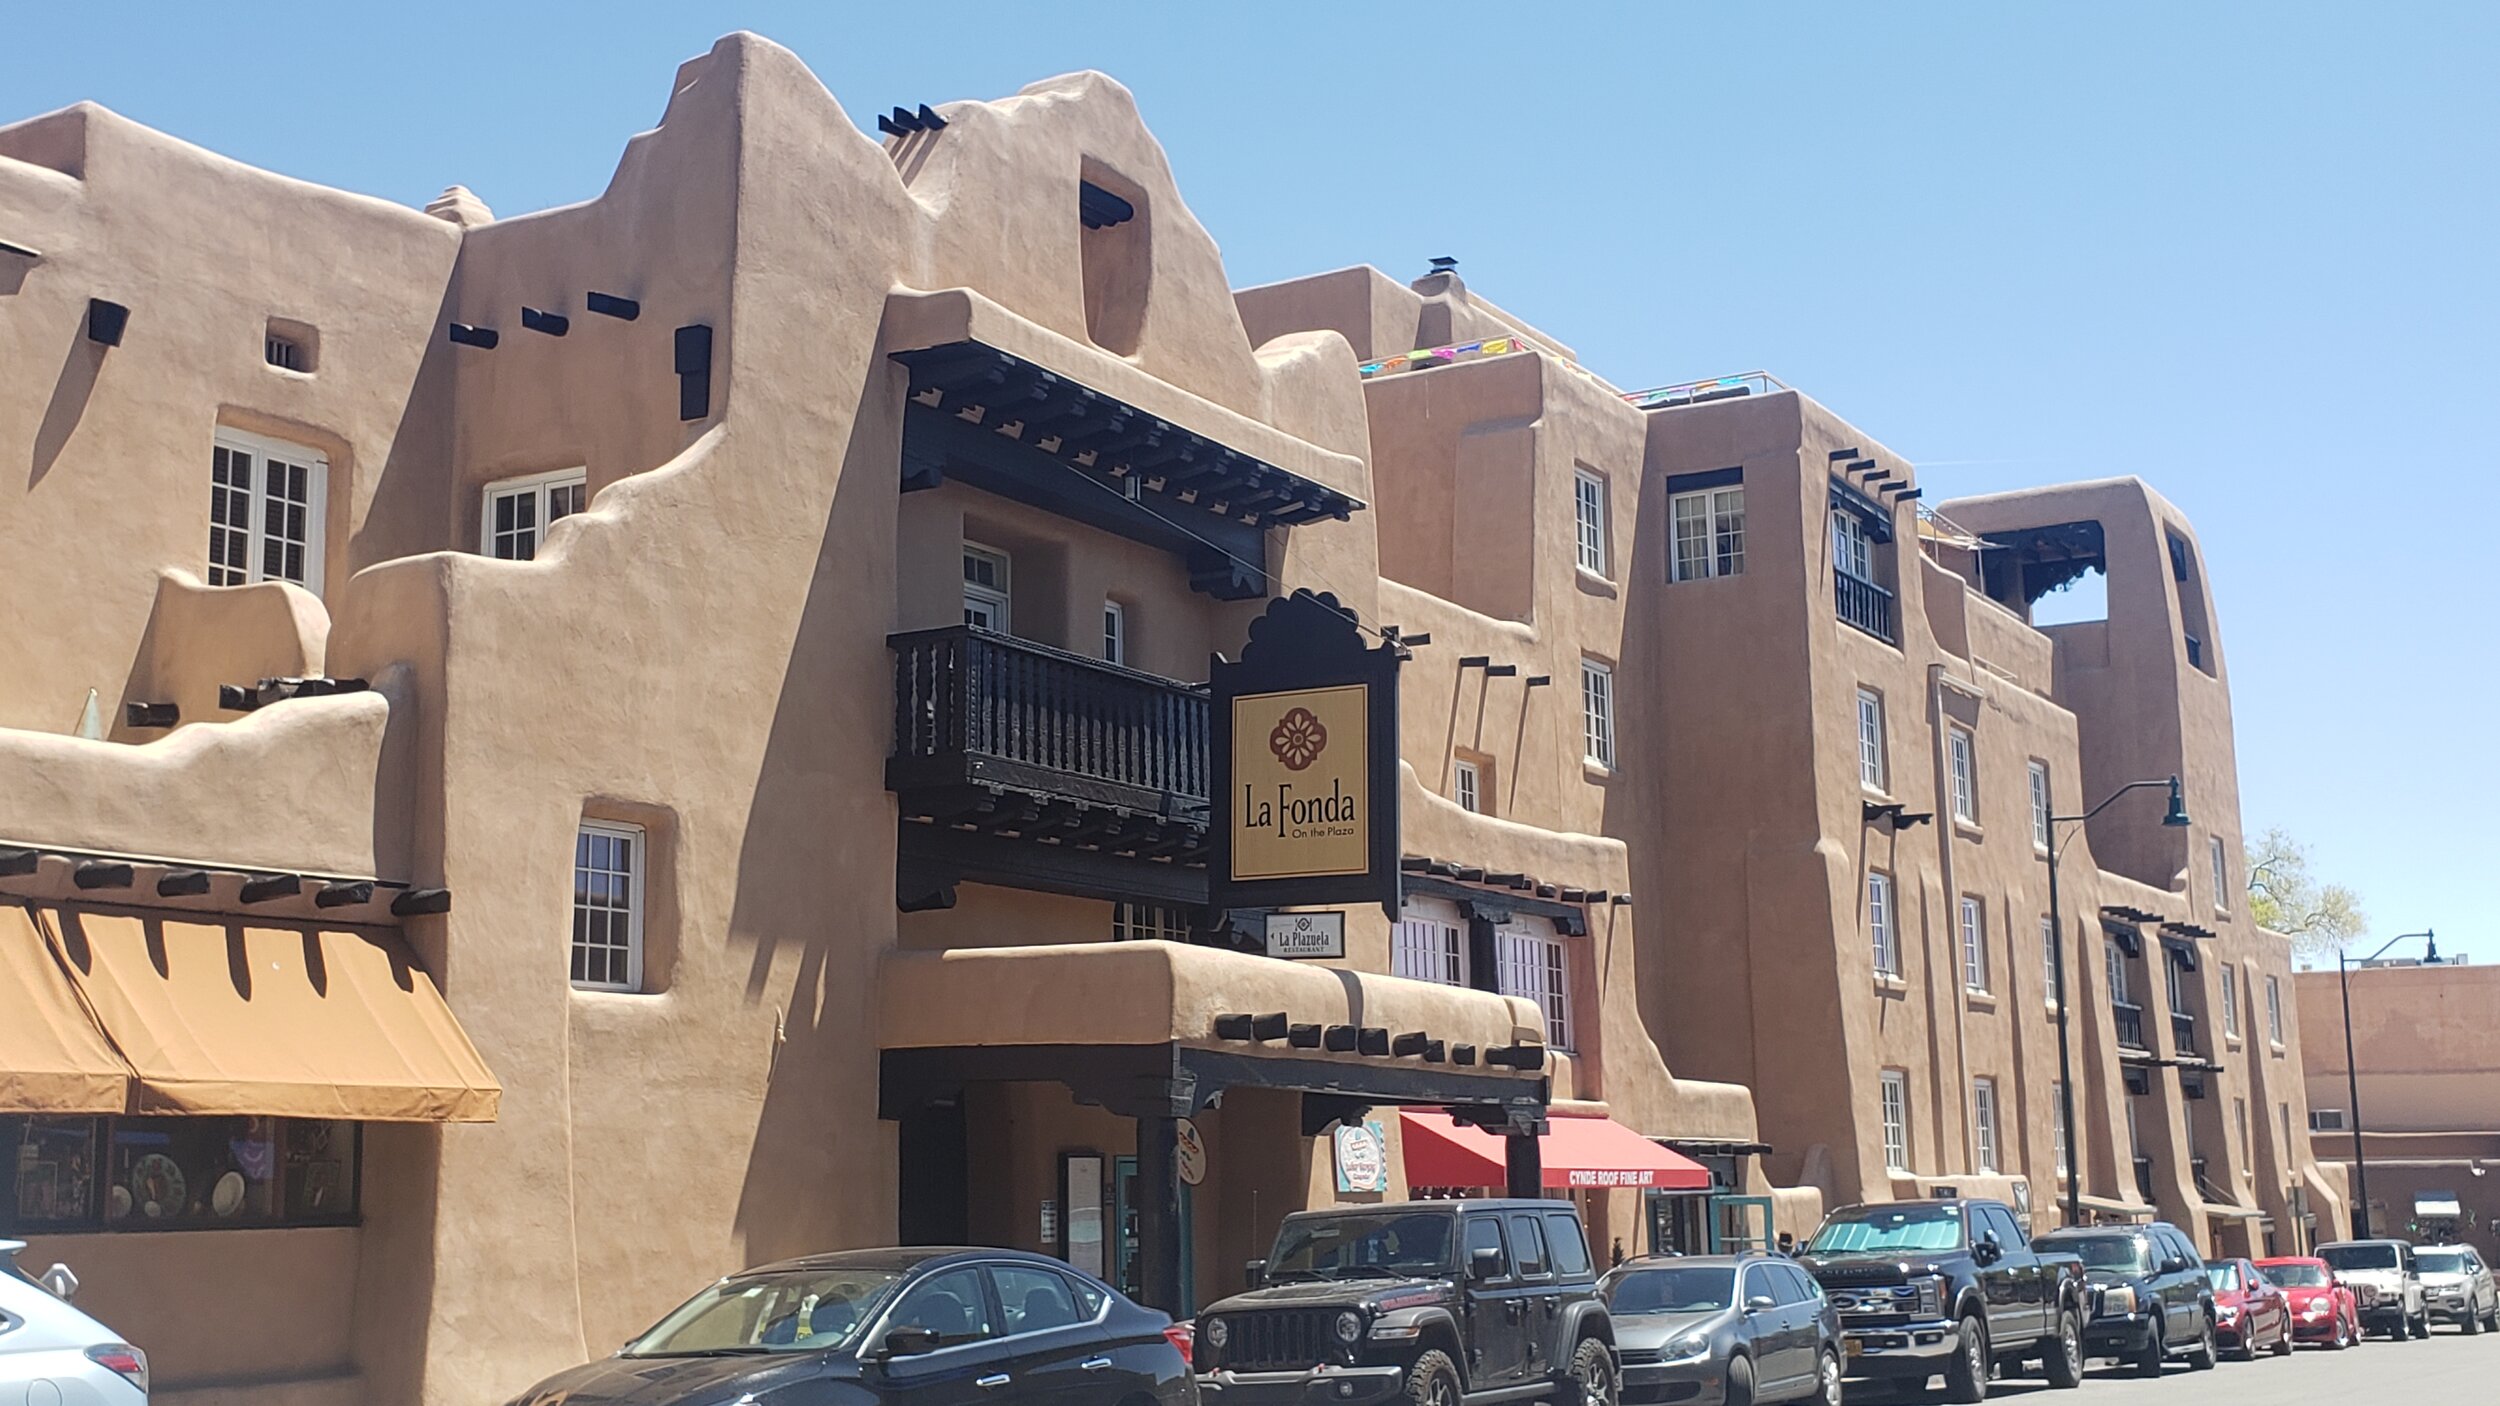 Large adobe building in downtown Santa Fe, New Mexico